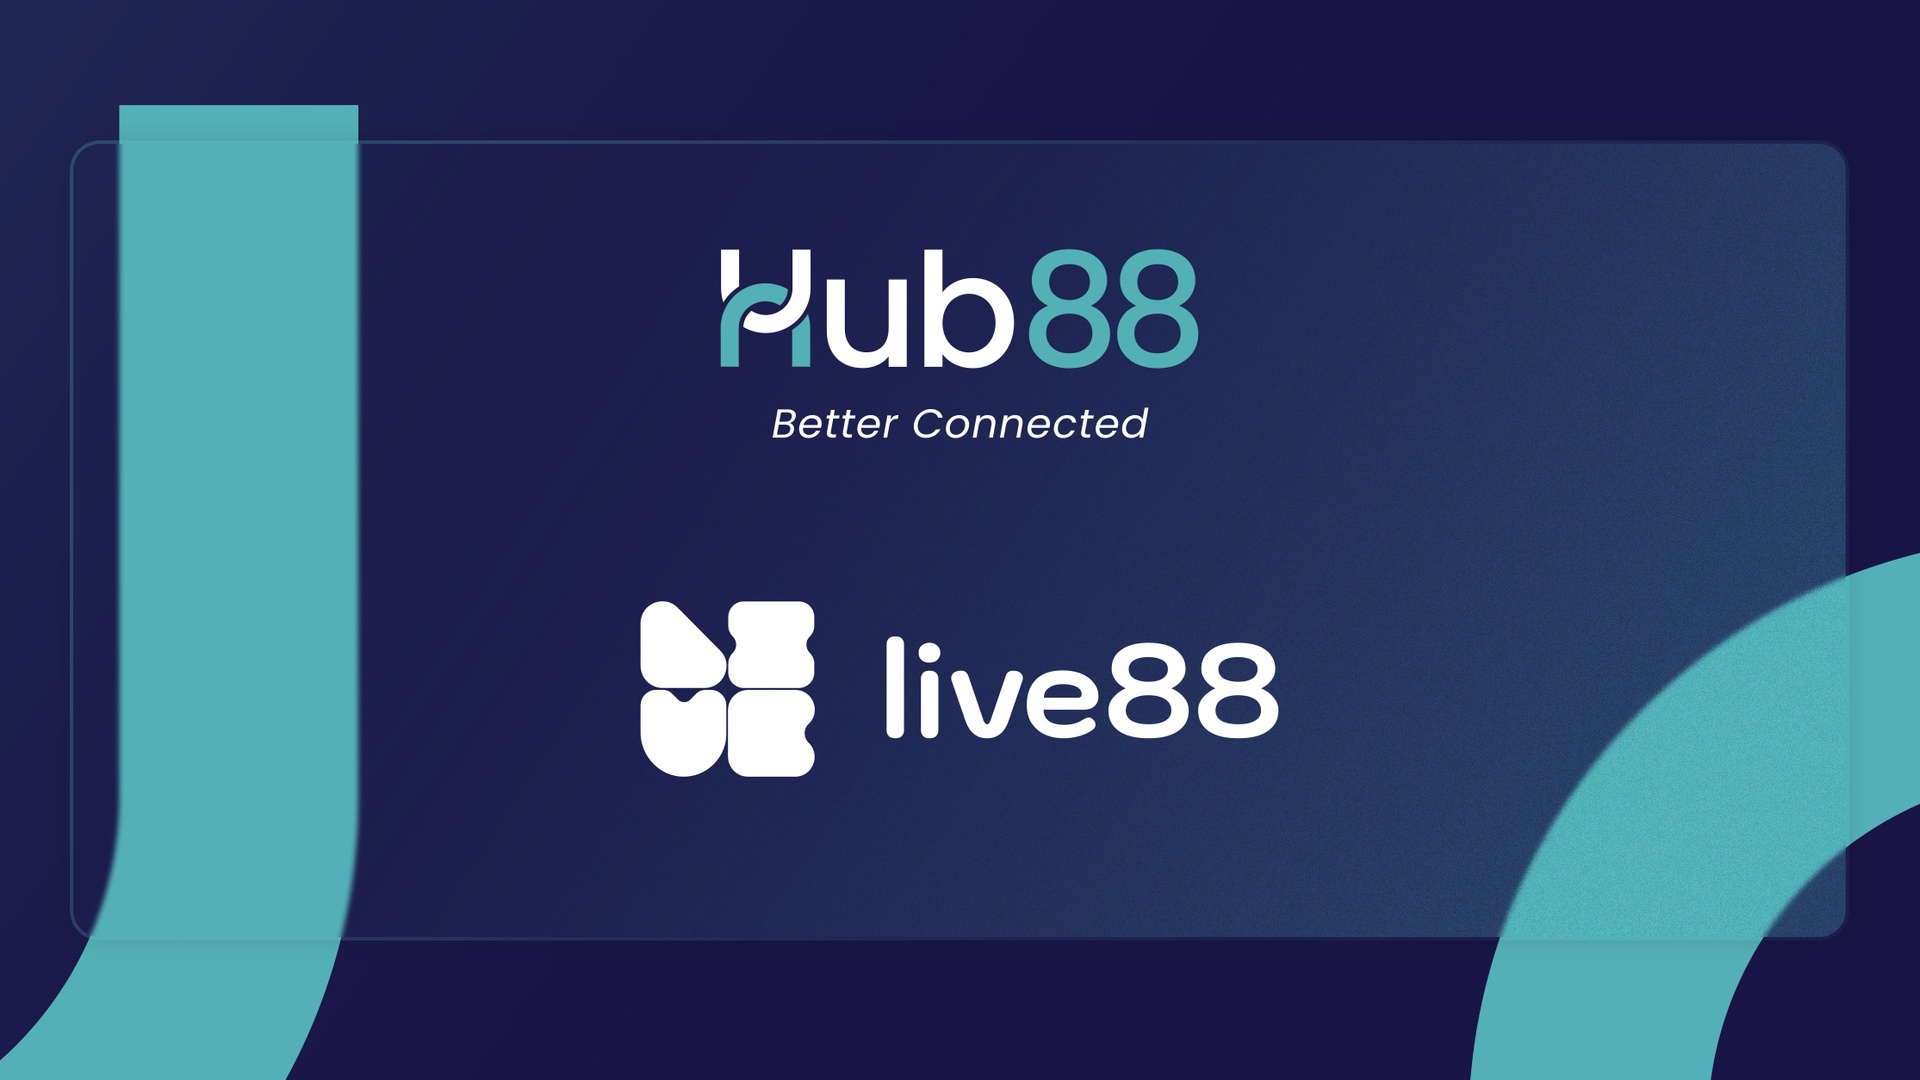 Cover Image for Live88 launches to shake up live casino market